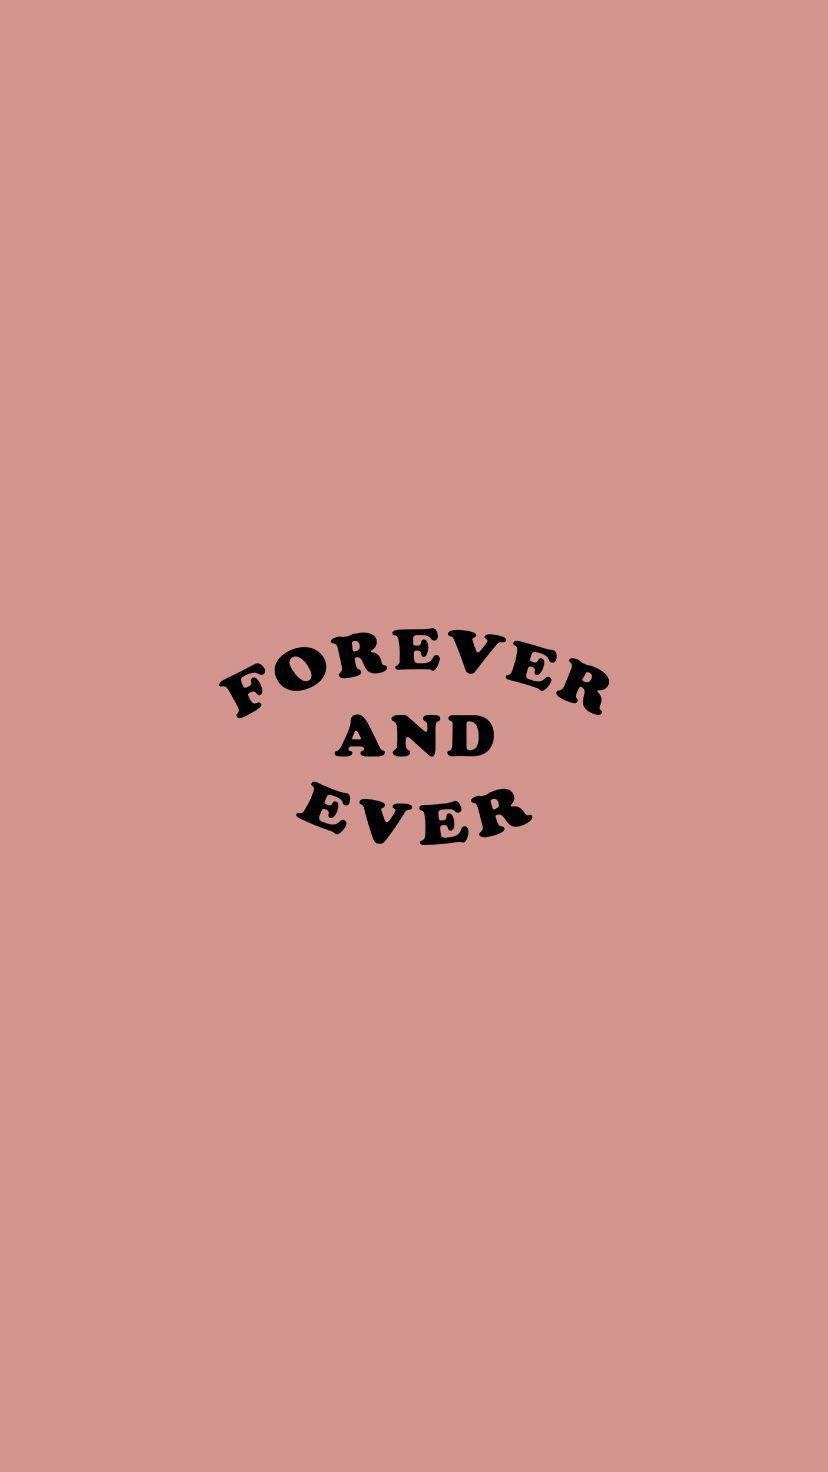 Always and Forever Wallpapers  Top Free Always and Forever Backgrounds   WallpaperAccess